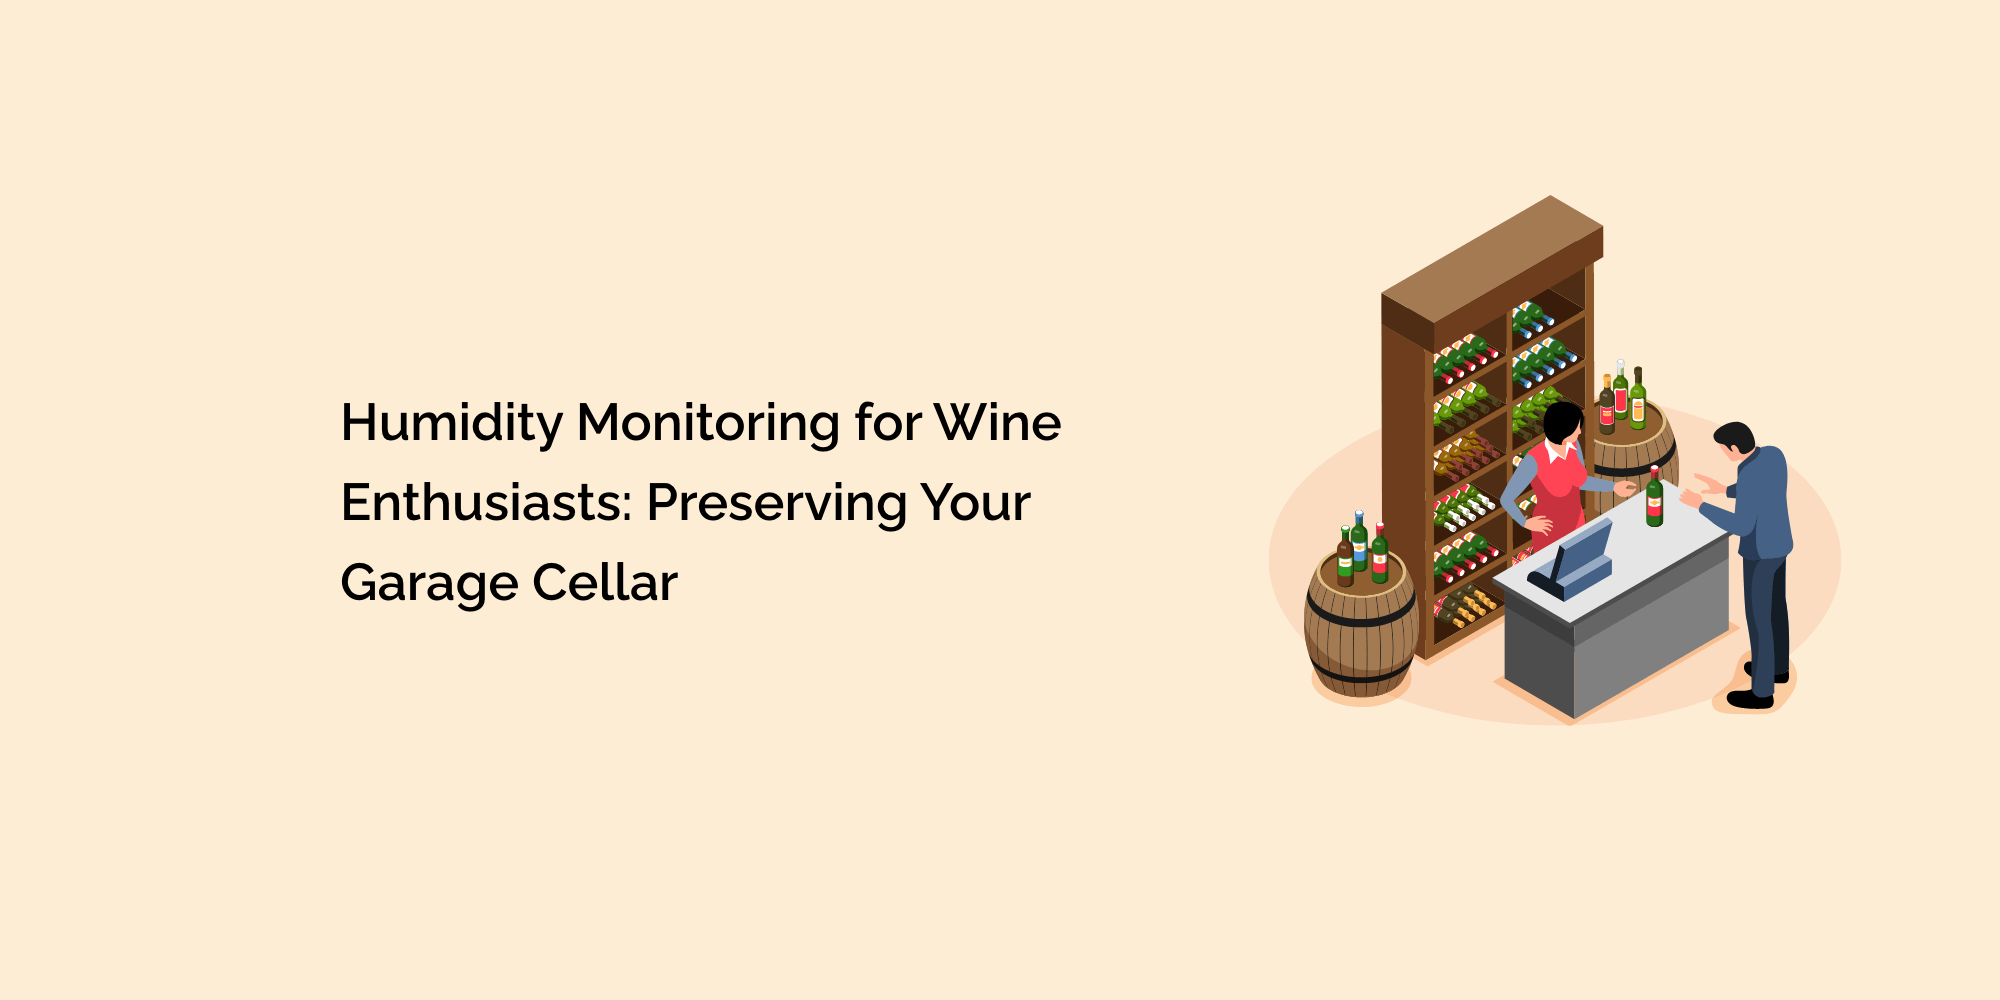 Humidity Monitoring for Wine Enthusiasts: Preserving Your Garage Cellar